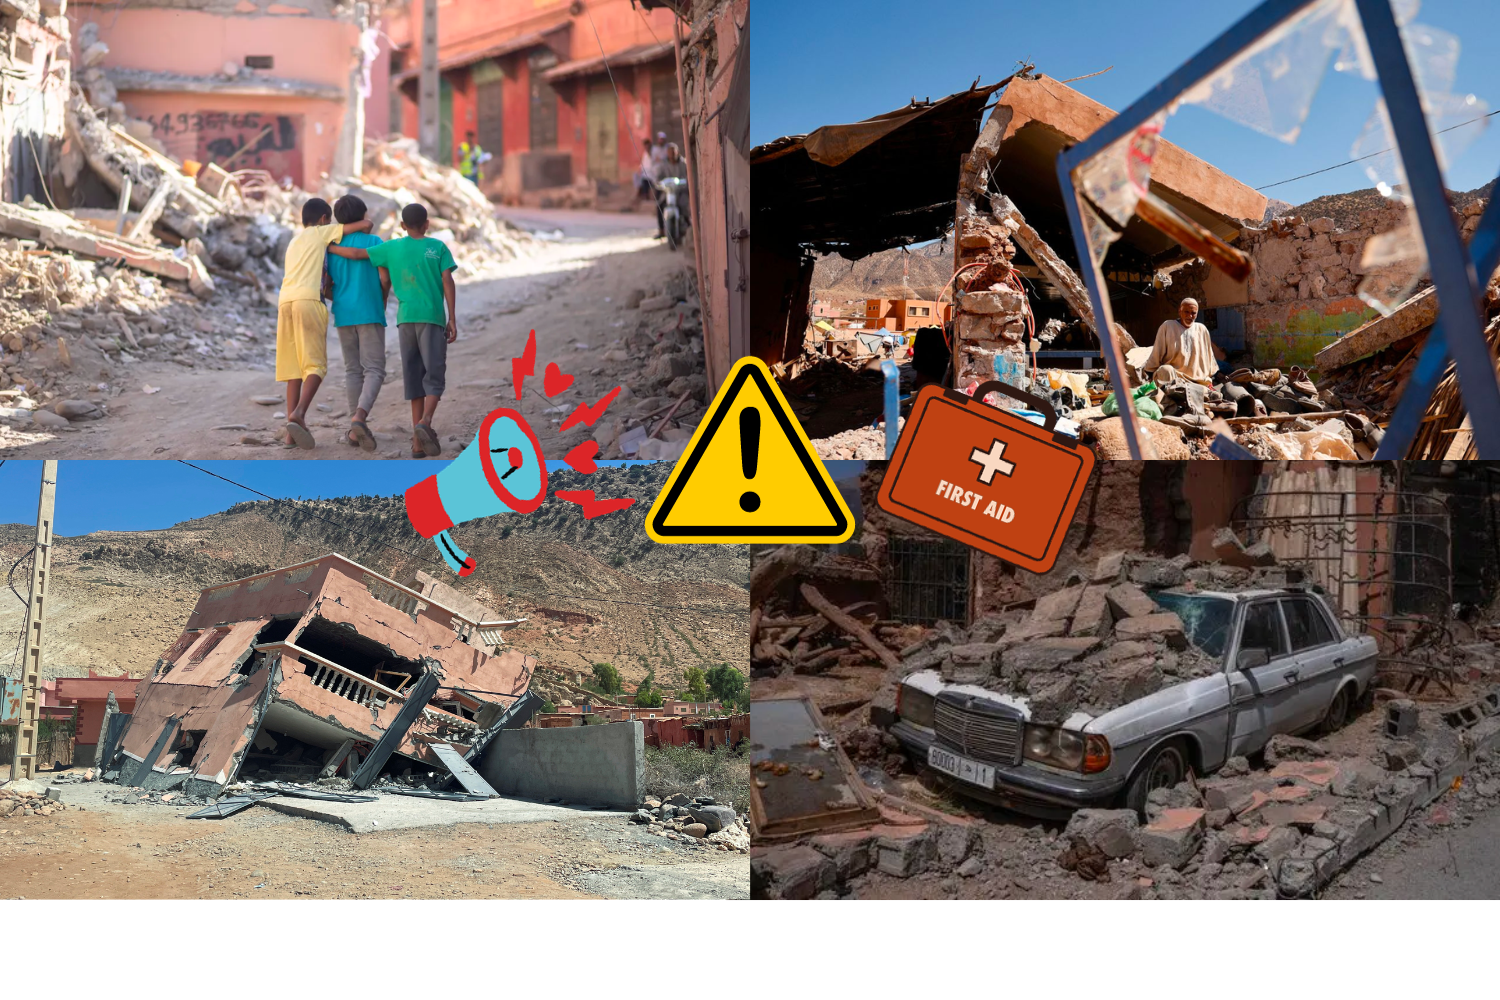 The Morocco earthquakes were a wake up call to be better equipped for natural disasters. The country is receiving unconditional support from around the world to come out this tragedy stronger than before.